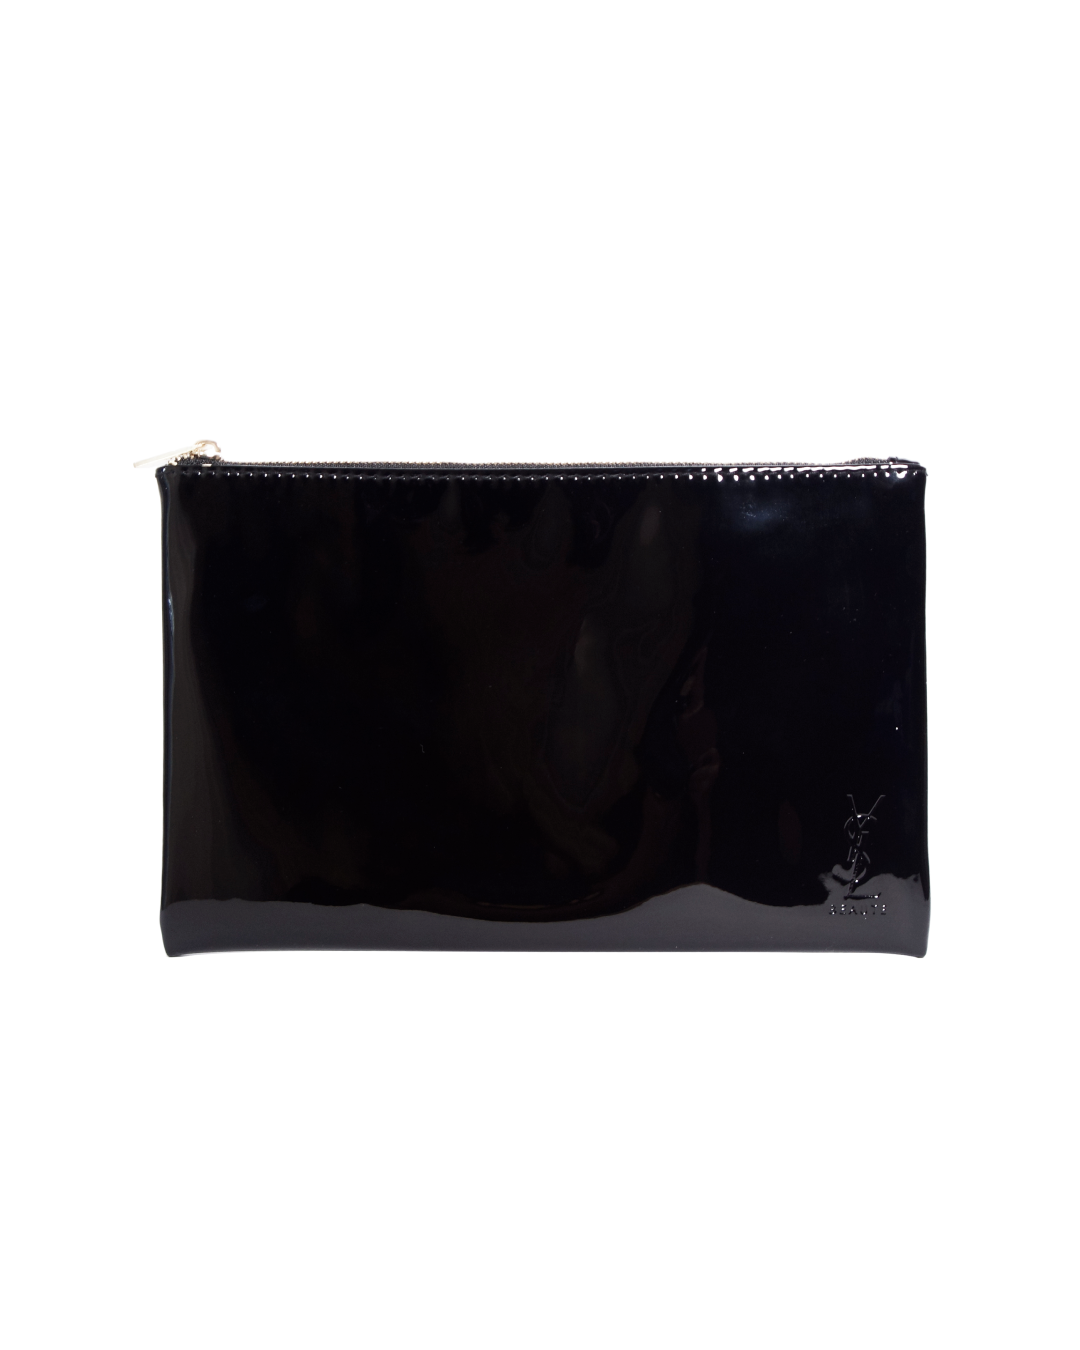 Yves Saint Laurent YSL Beauty Shiny Pouch in Black - Best Buy World Philippines